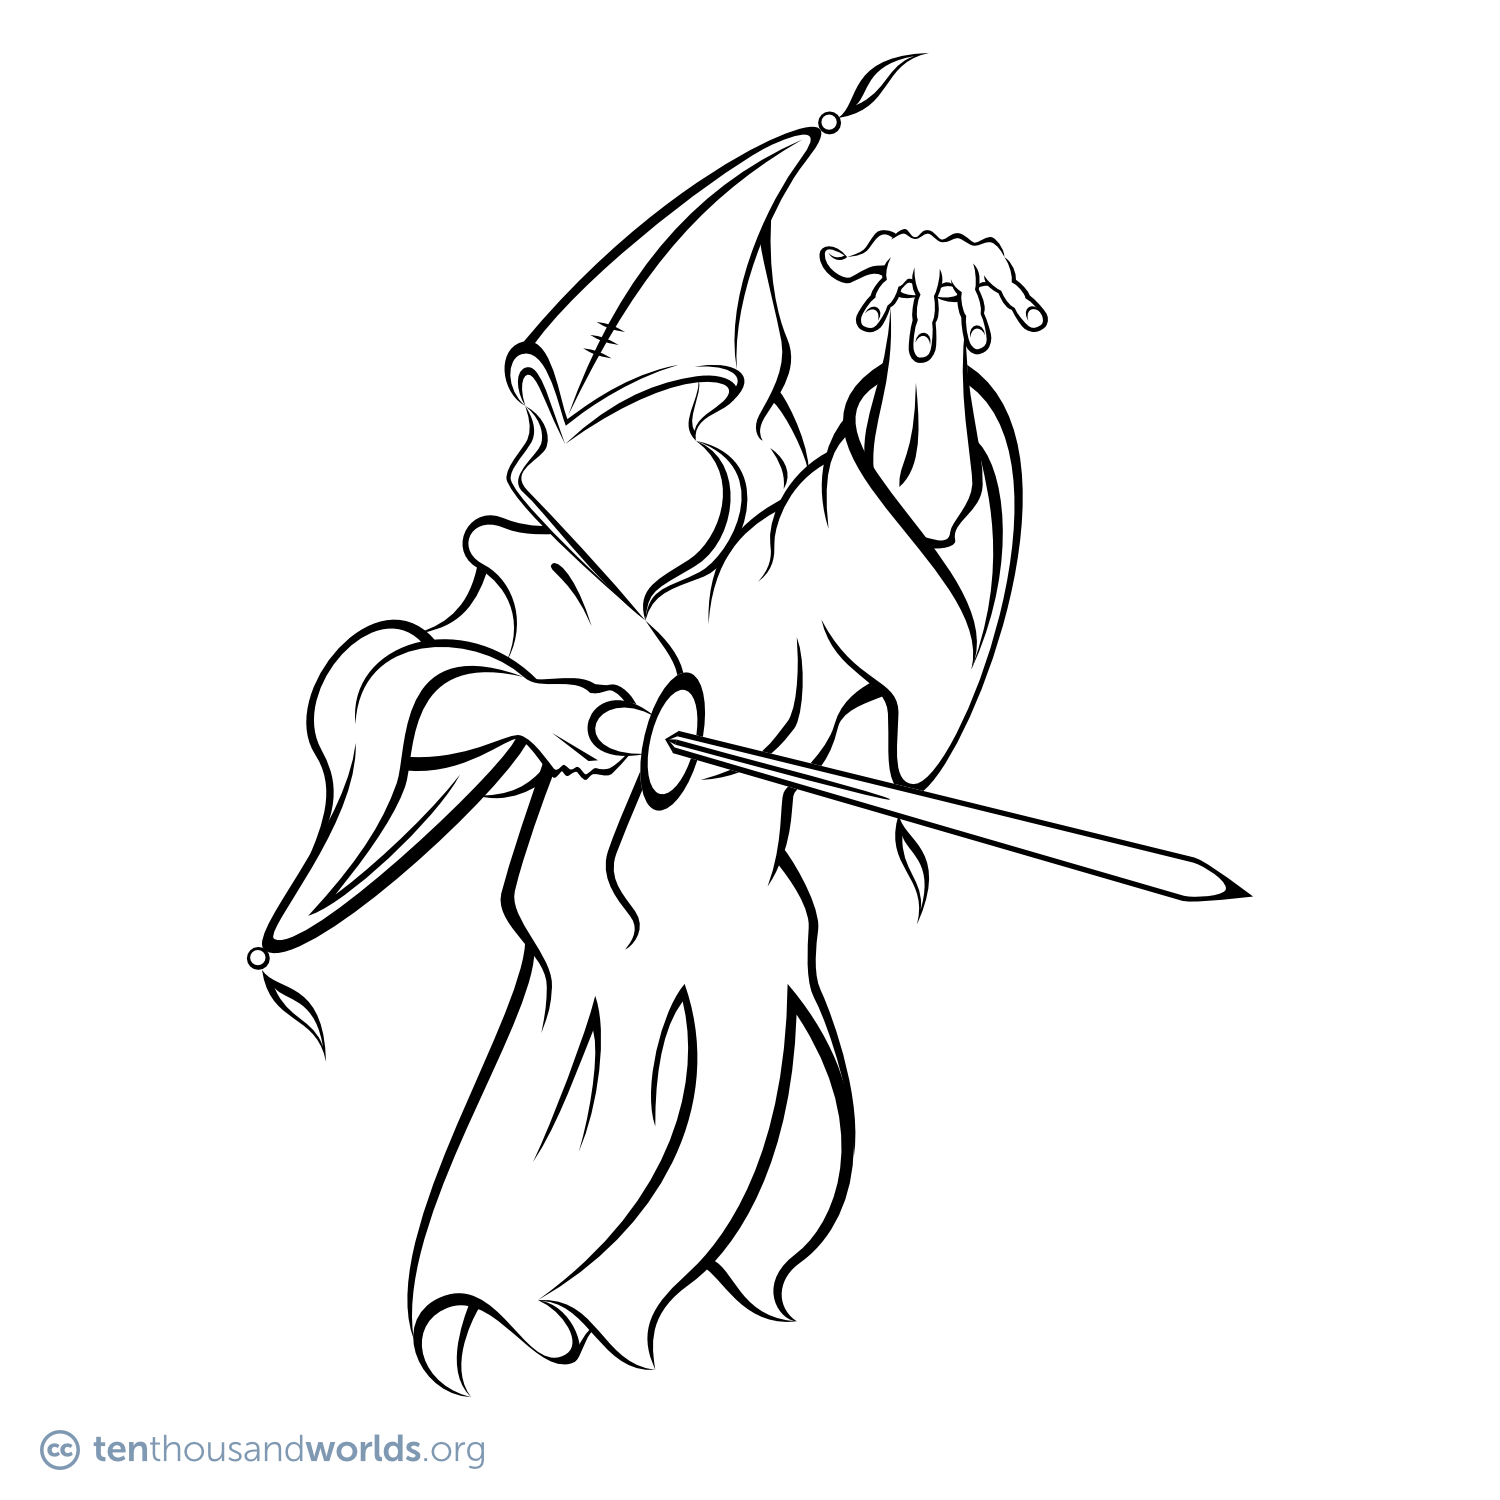 An ink outline of a faceless figure wrapped in voluminous robes with a pointed, tasseled hood; disappearing below the robes’ bottom edge; left hand raised to make an incantation; right hand holding a sword.